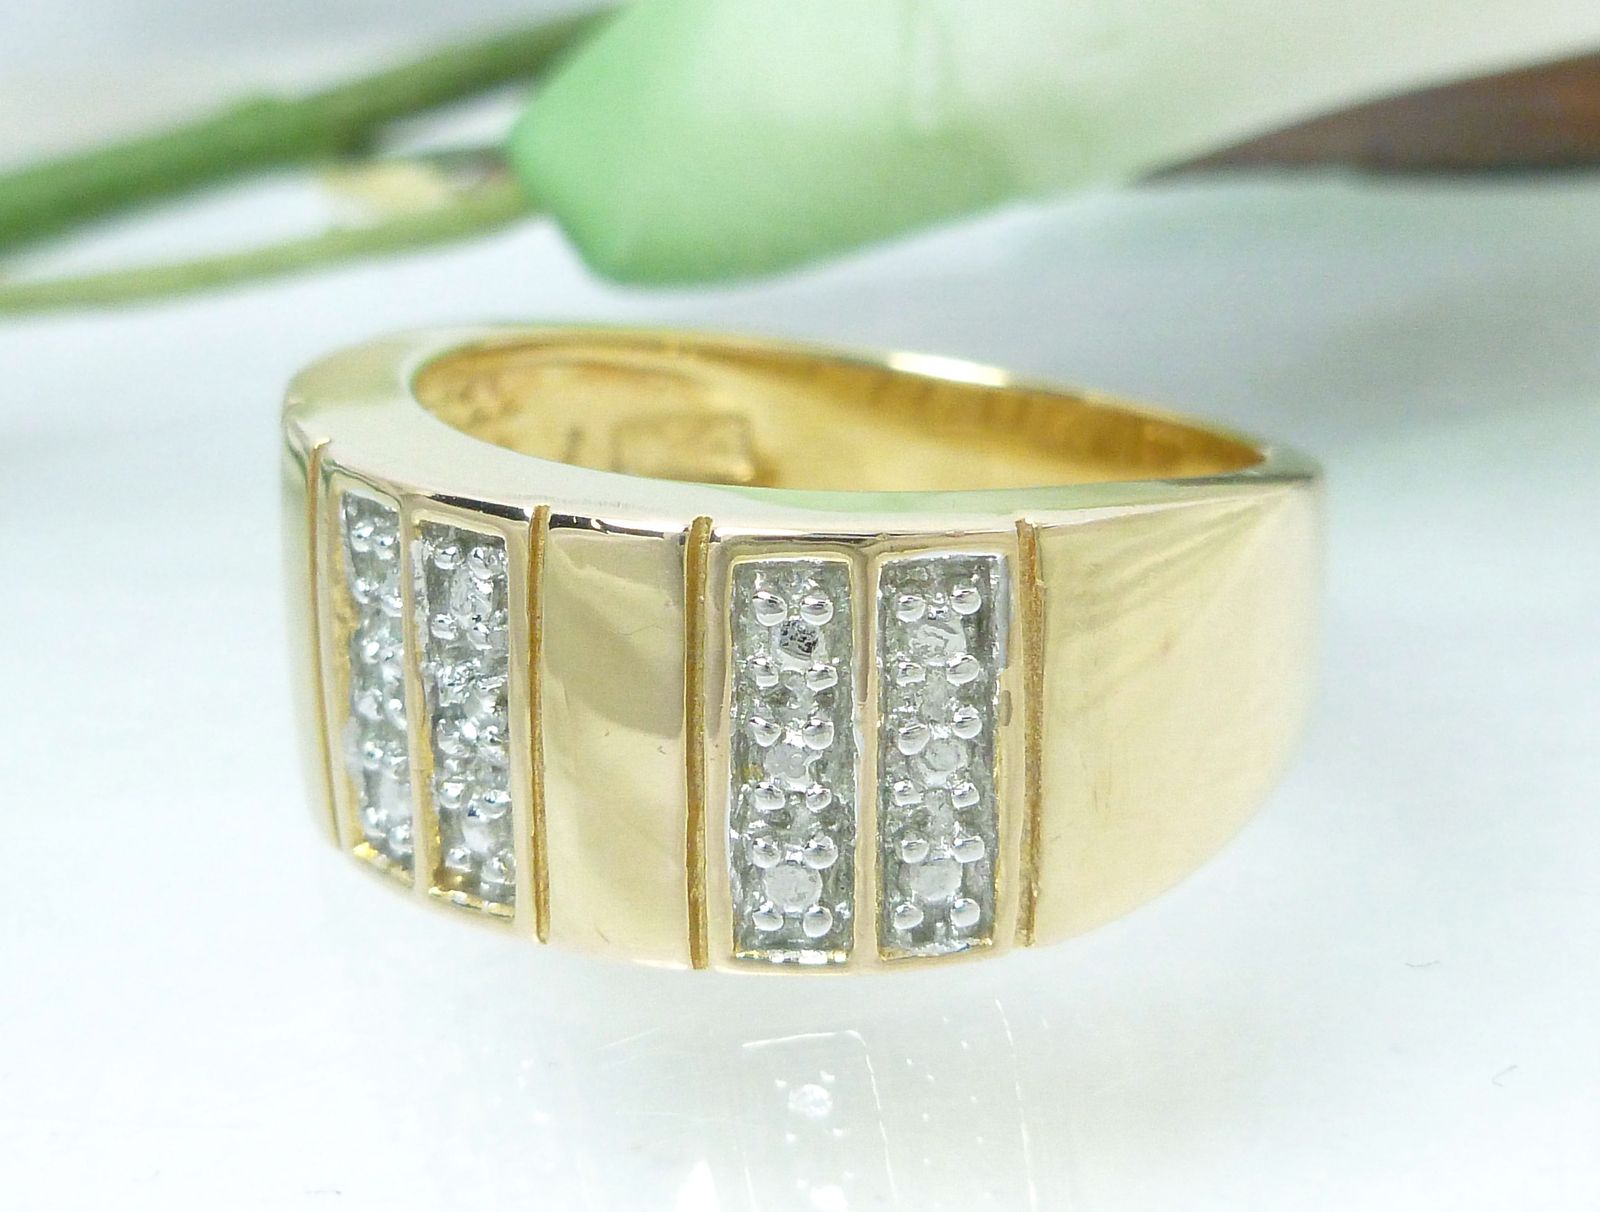 Primary image for Technibond Diamond Accent Striped Ring 18K Yellow Gold over Sterling Size 7